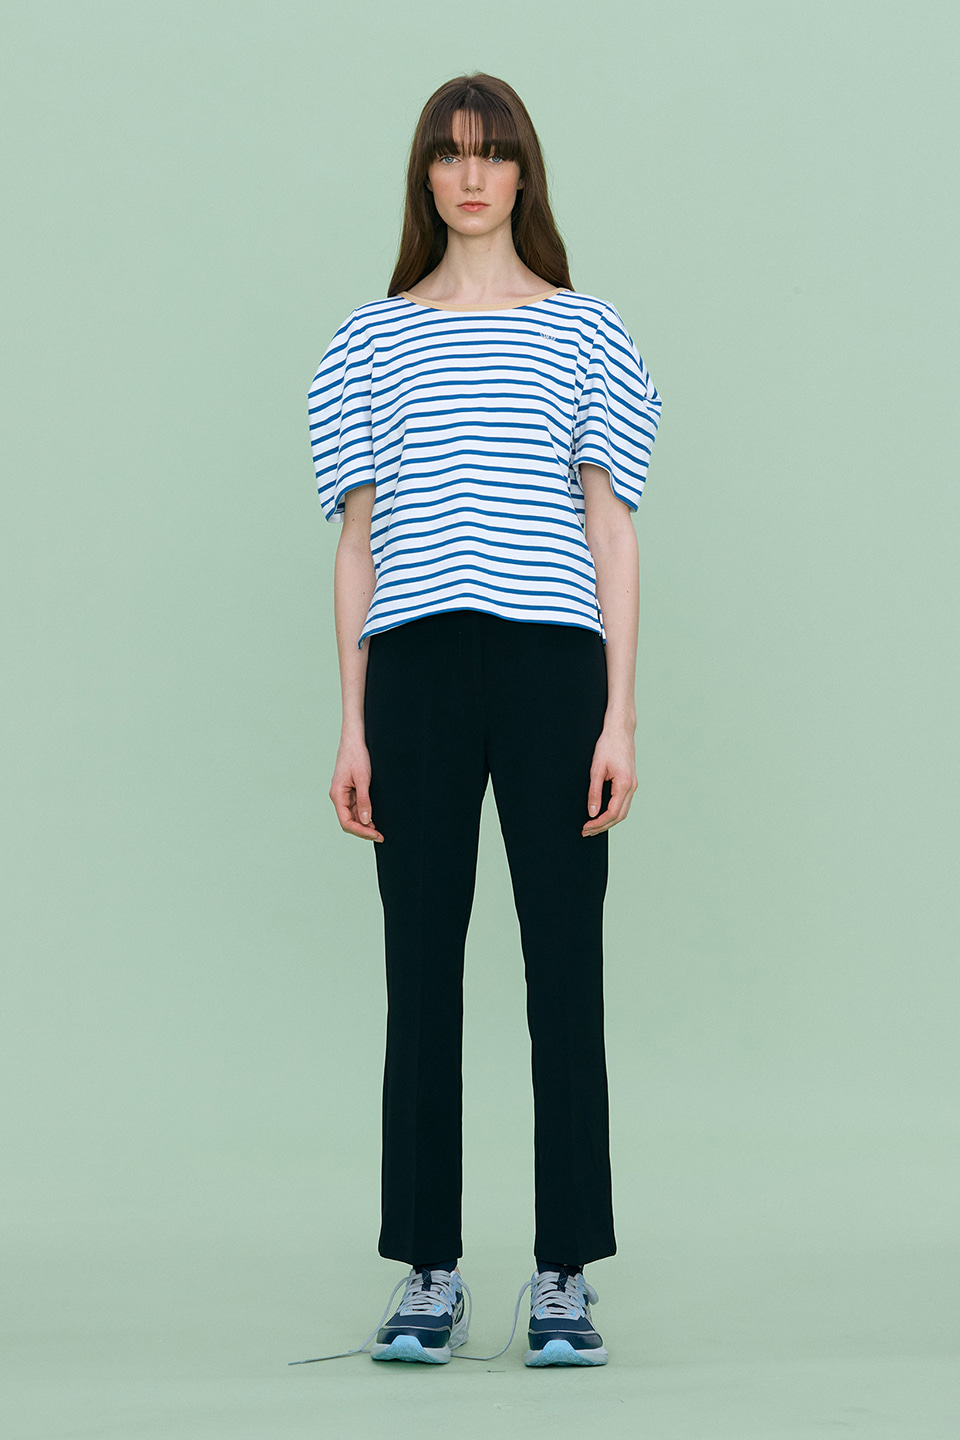 Striped Short Sleeved T-shirts_BLUE